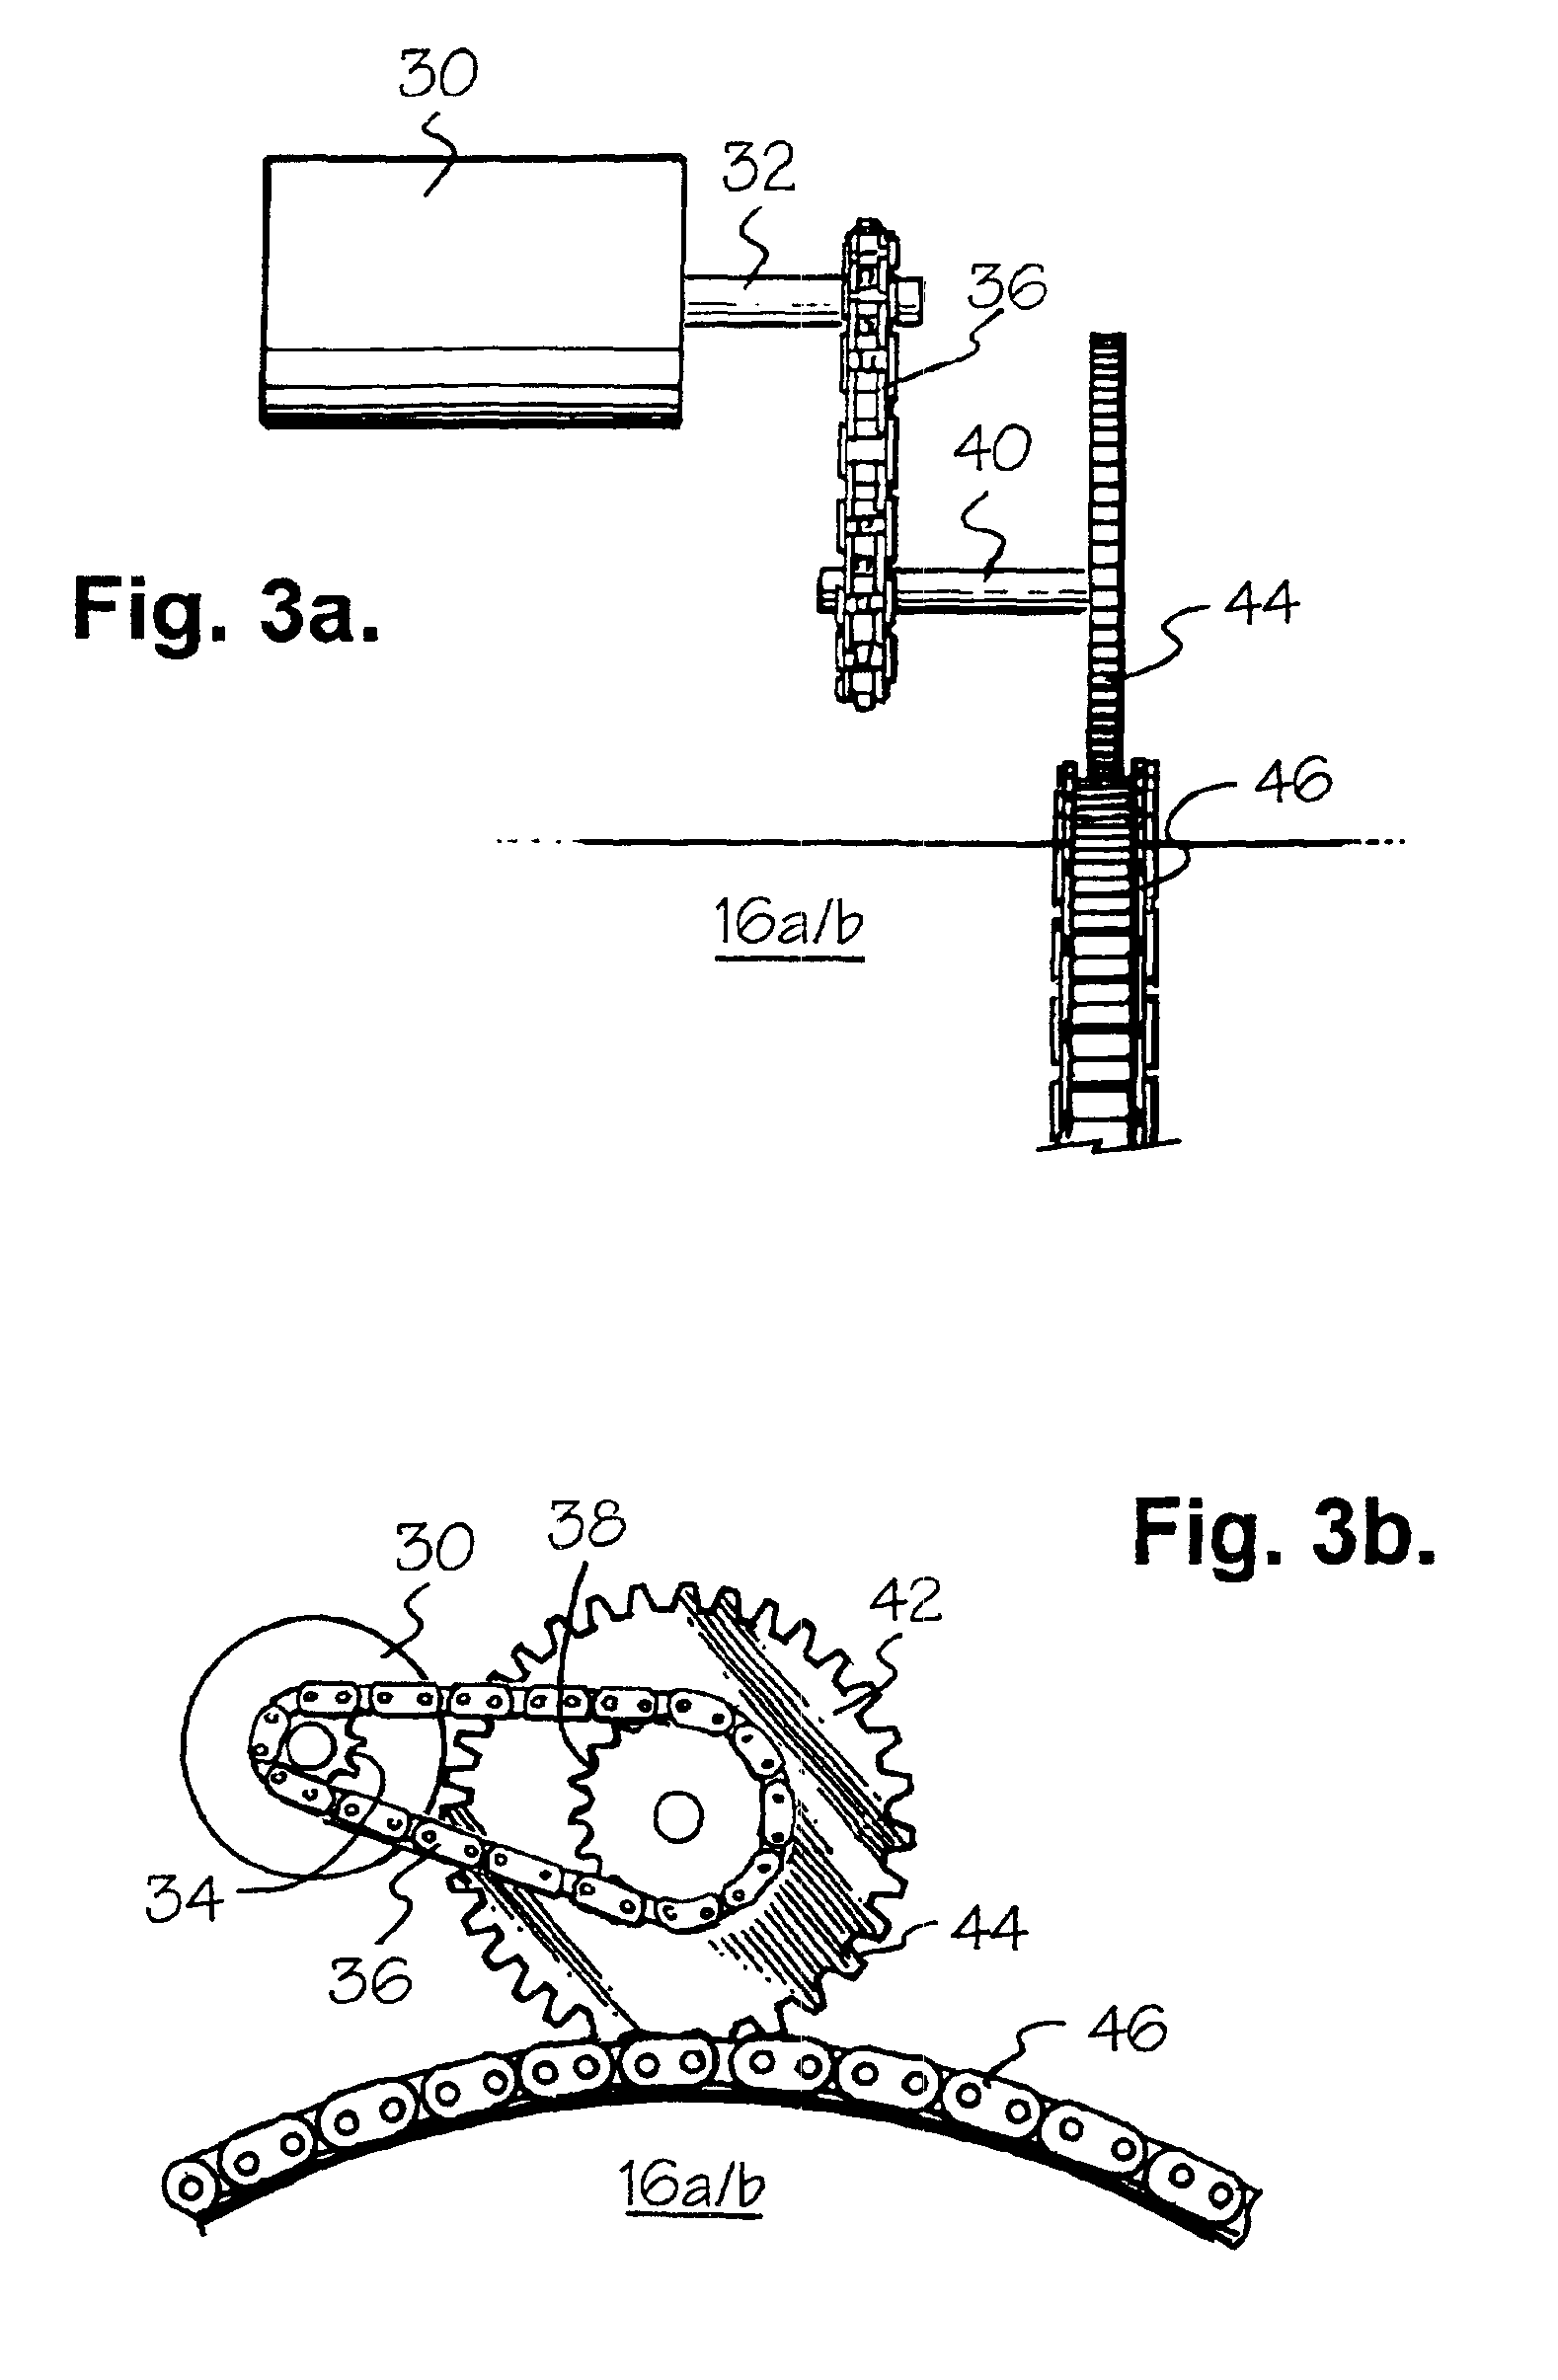 Method and apparatus for containing and agitating the contents of a container